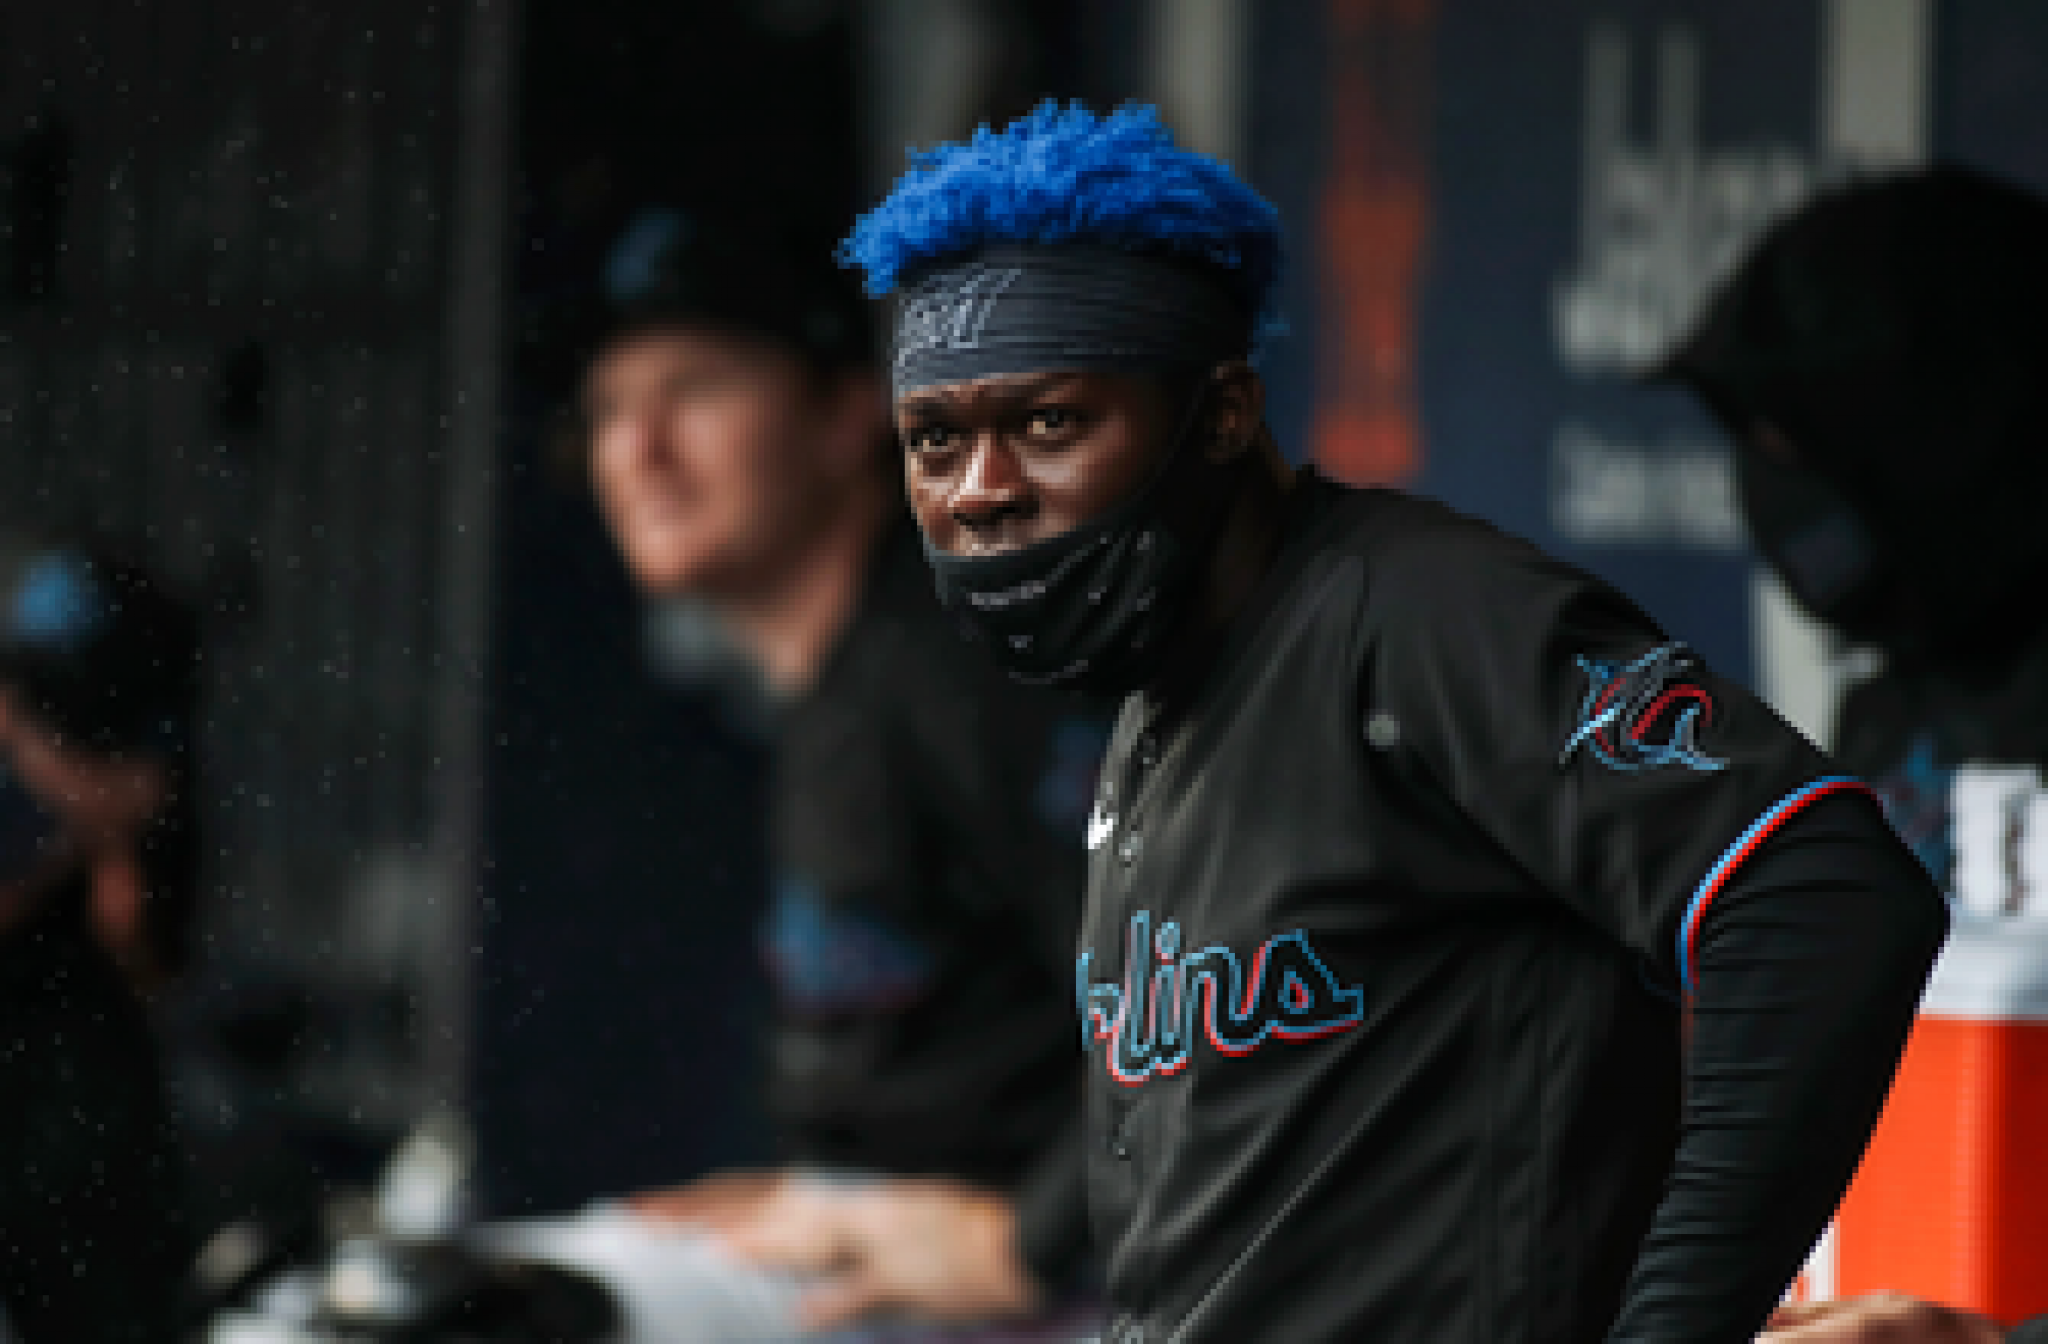 Marlins-Mets series finale postponed due to rainout, rescheduled as part of doubleheader to Aug. 31